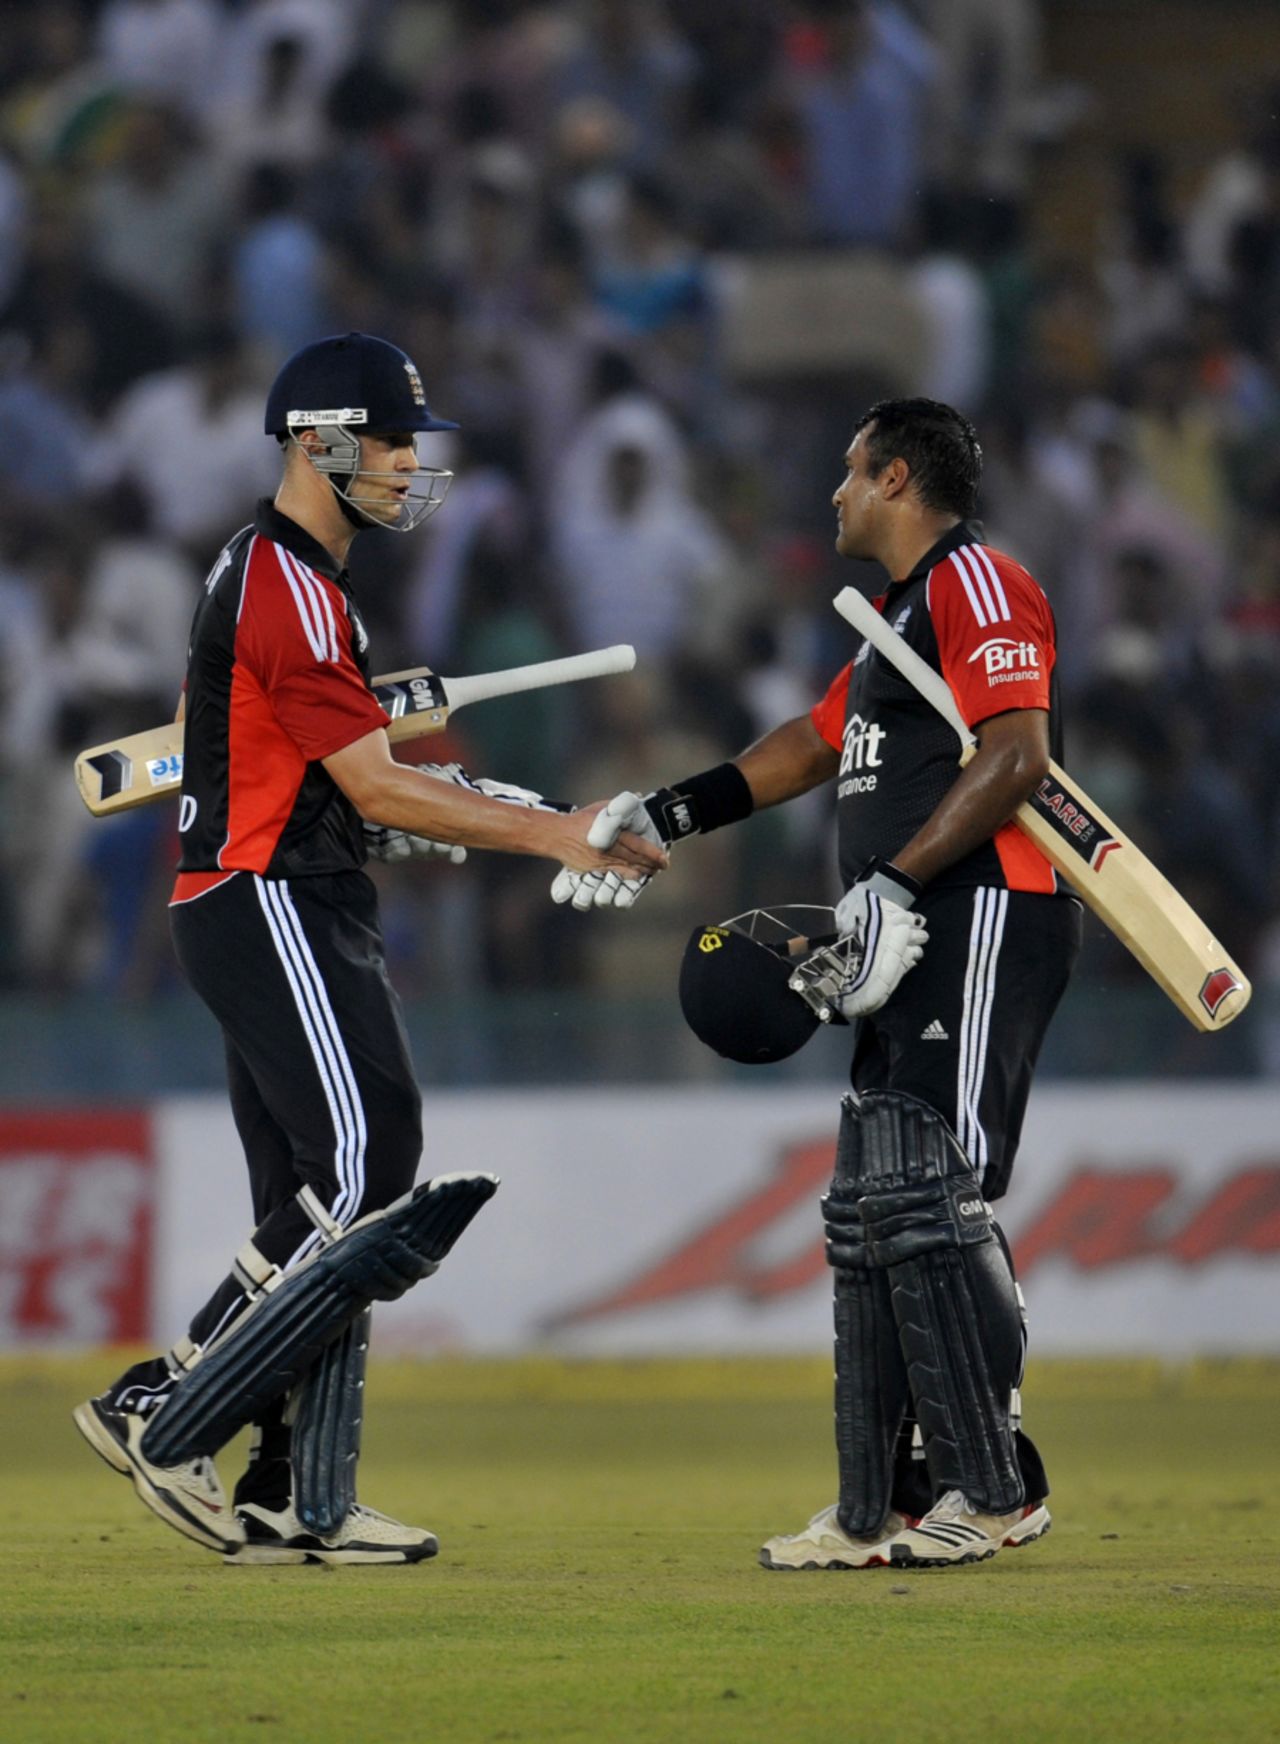 Jonathan Trott and Samit Patel put on 103 for the third wicket, India v England, 3rd ODI, Mohali, October 20, 2011